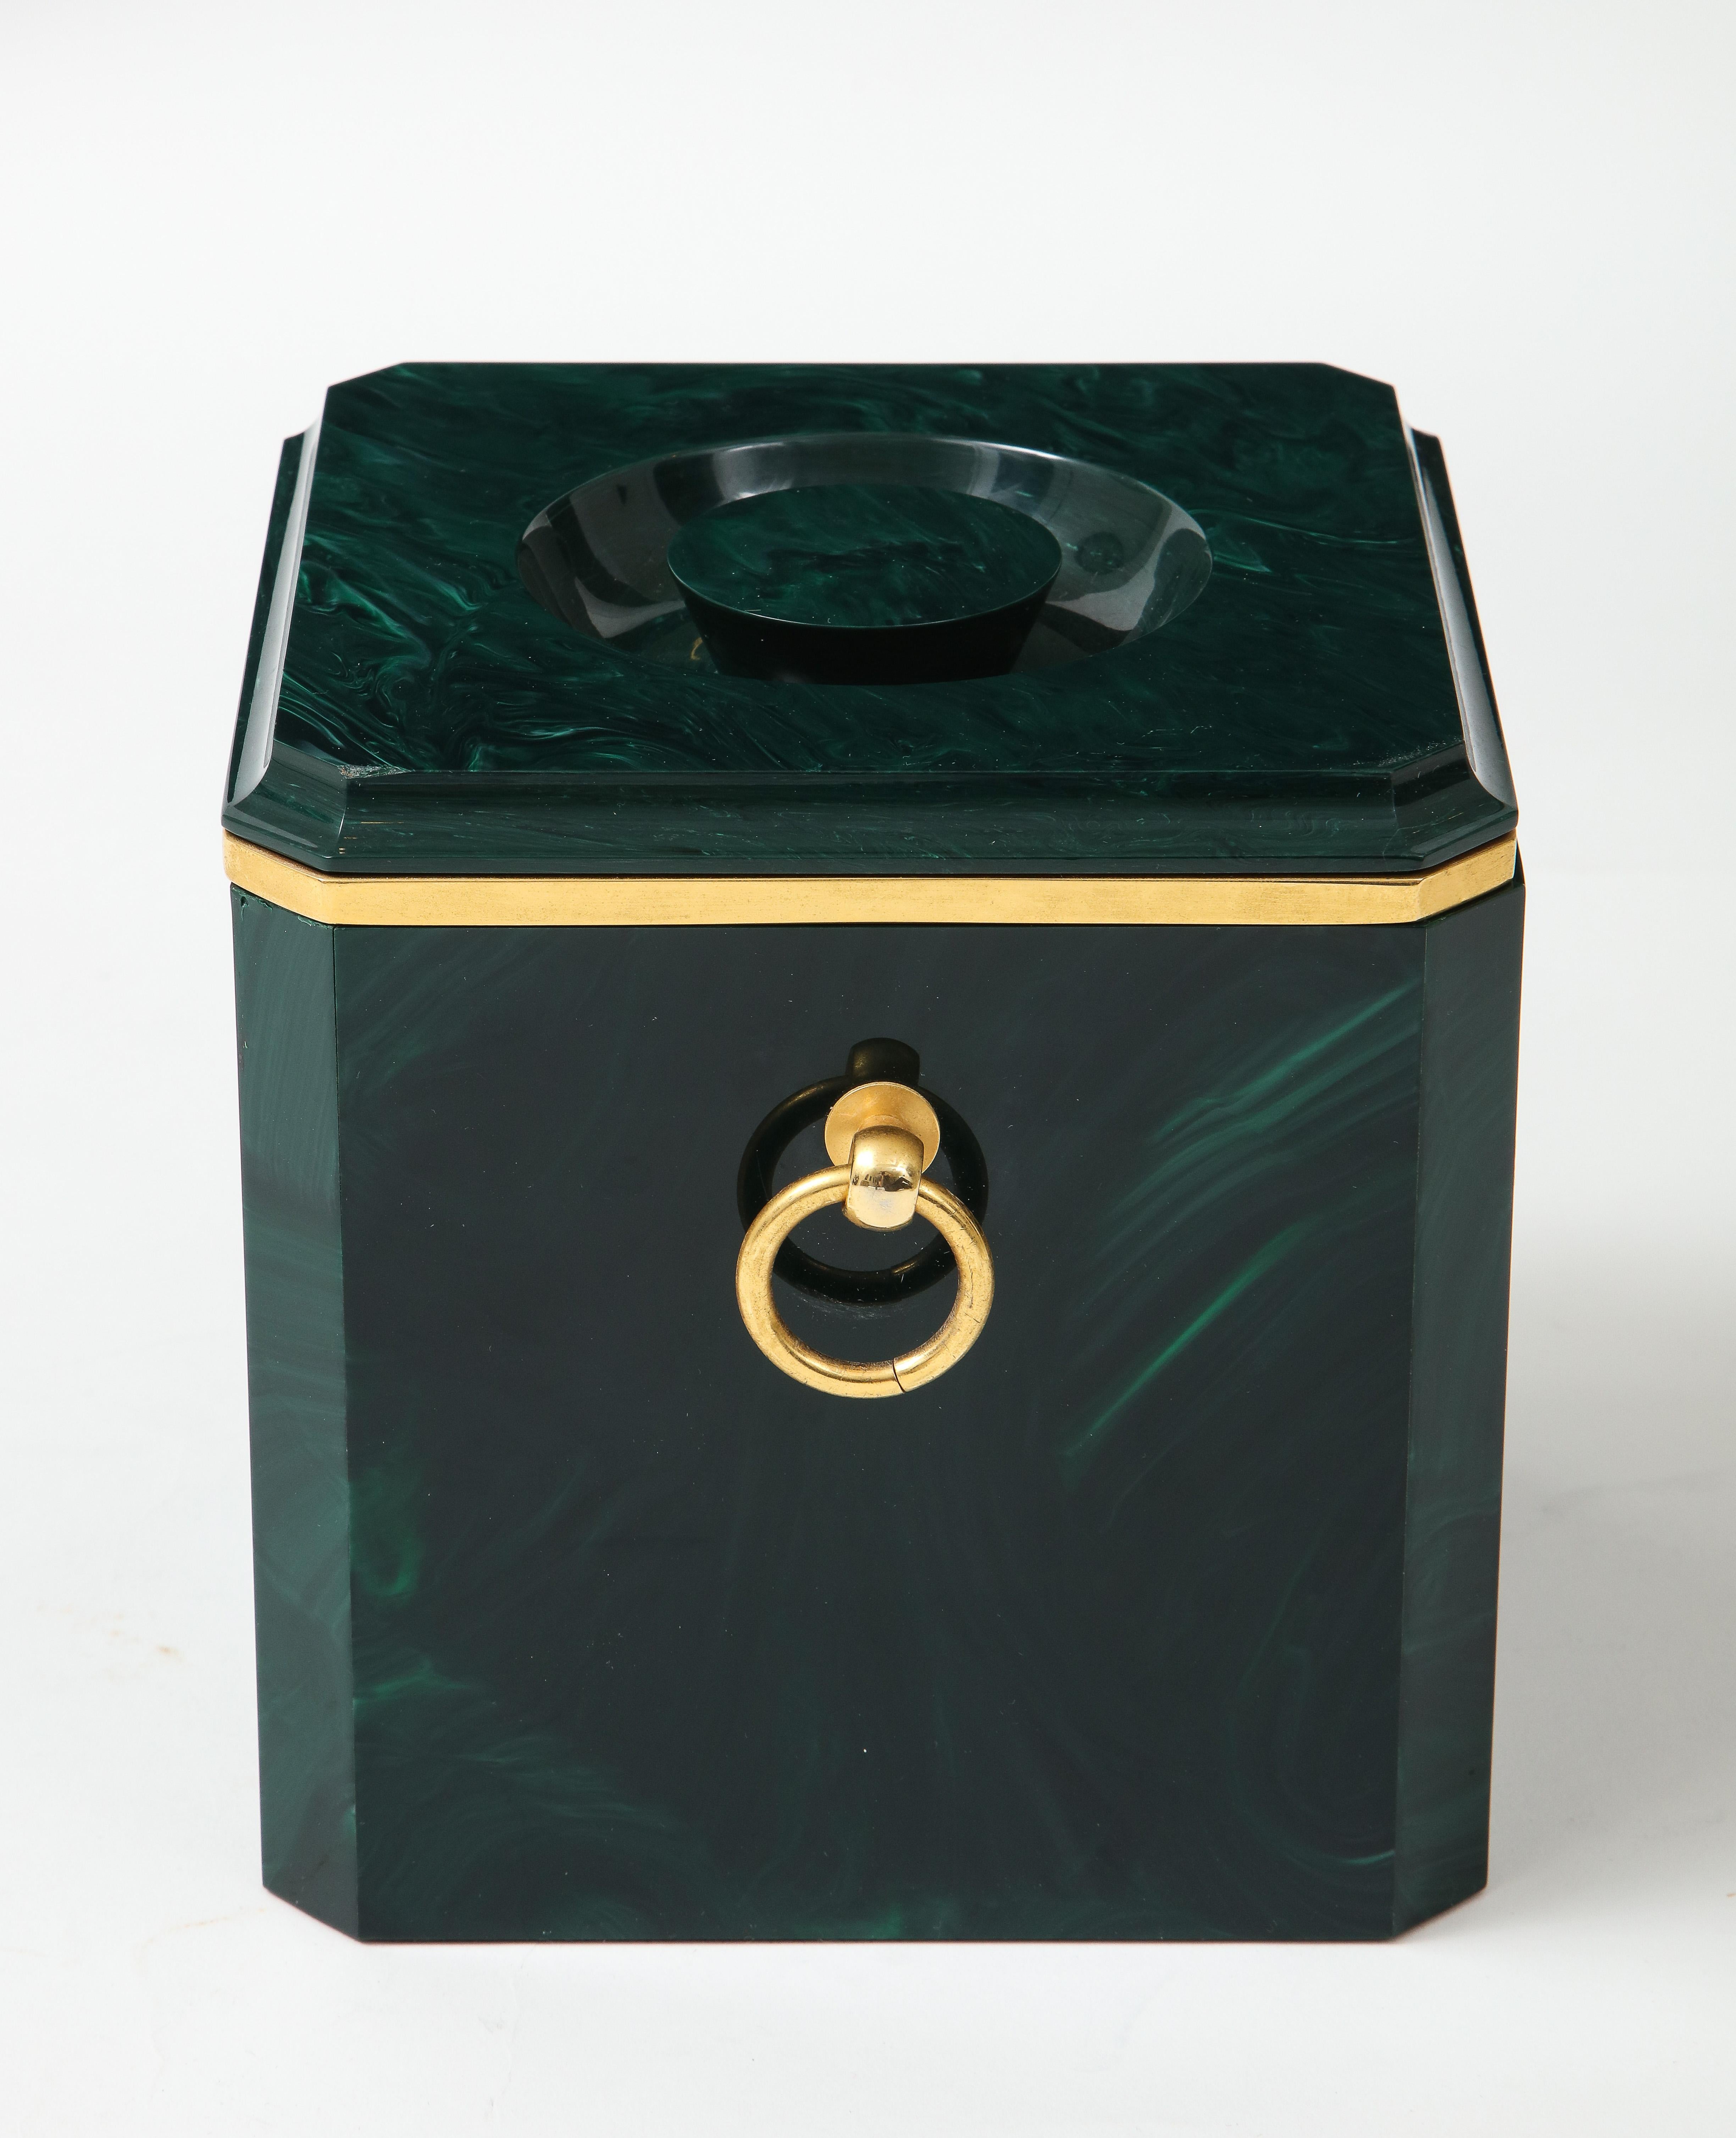 Aldo Tura faux malachite ice bucket with brass rings and brass rim detail under lid, Italy, 1970s. This stylish malachite ice bucket is well-made with wonderful features throughout including the beveled edges and brass details.